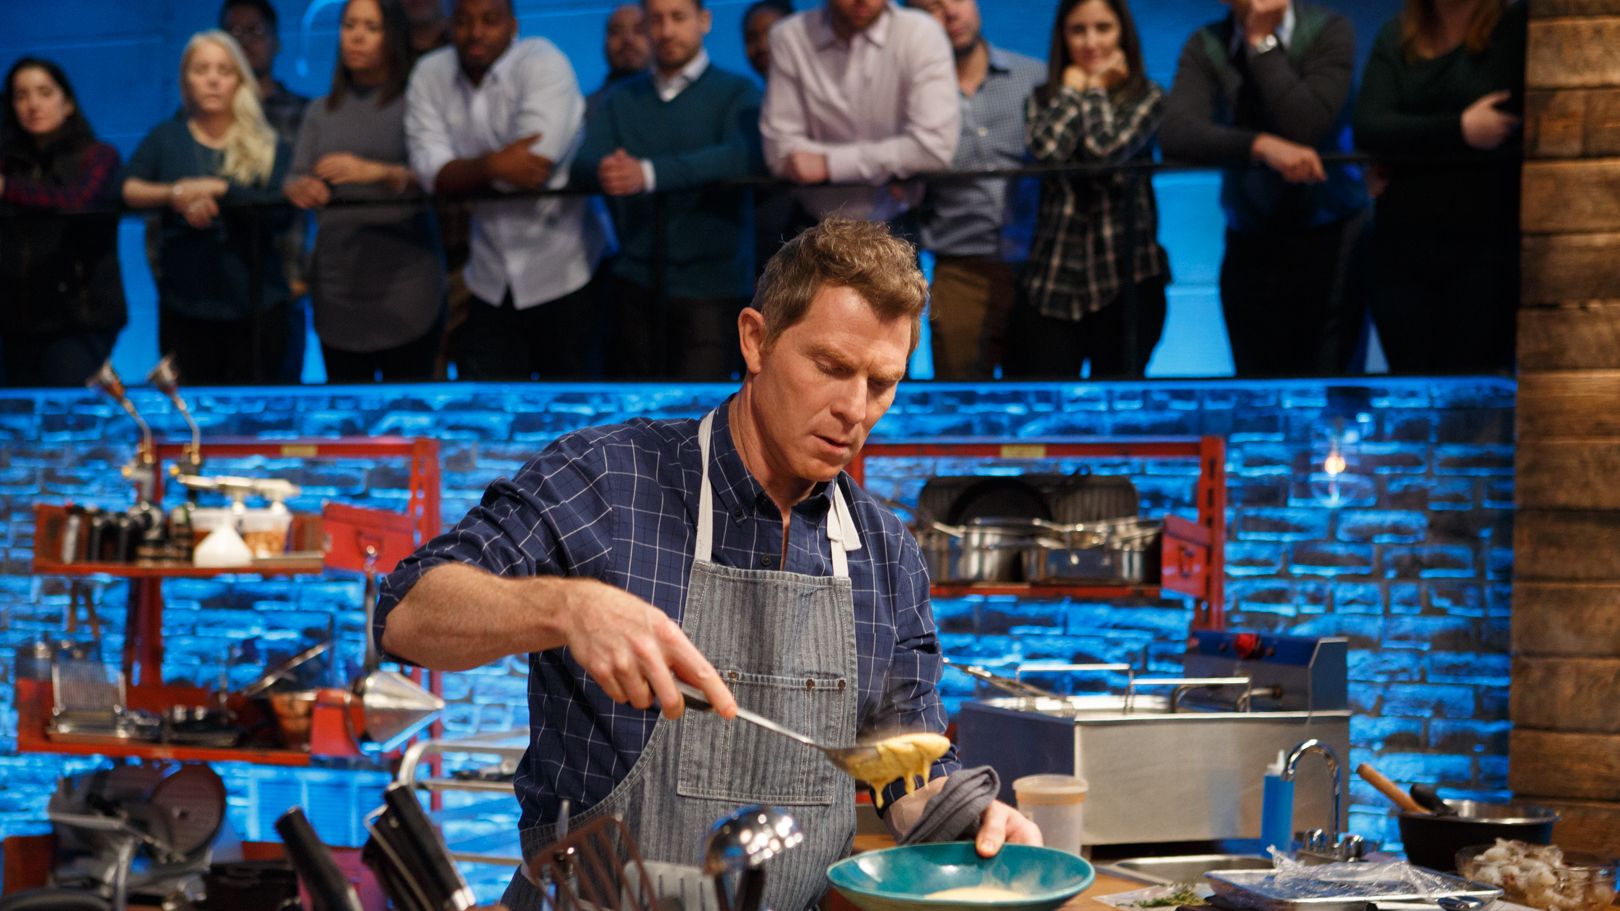 https://hips.hearstapps.com/hmg-prod/images/is-beat-bobby-flay-rigged-food-network-1653565971.jpg?crop=1xw:0.84375xh;center,top